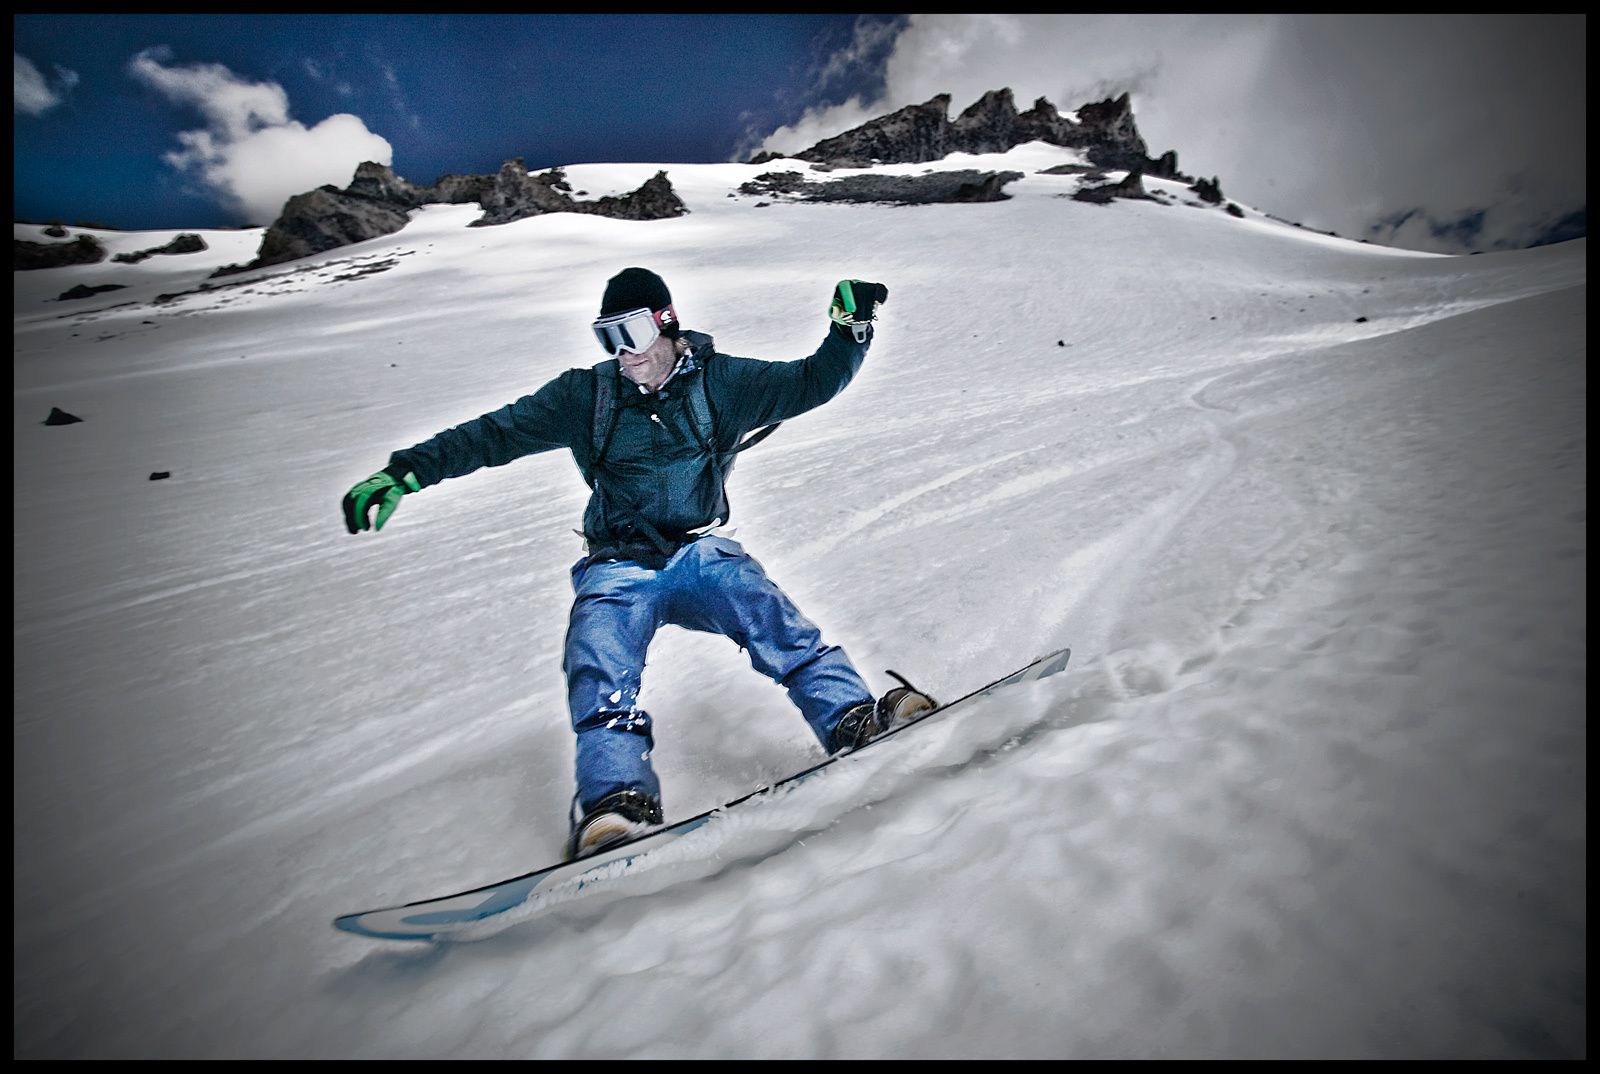 During an expedition atop Mt. Shasta for Jones Snowboards, V.2